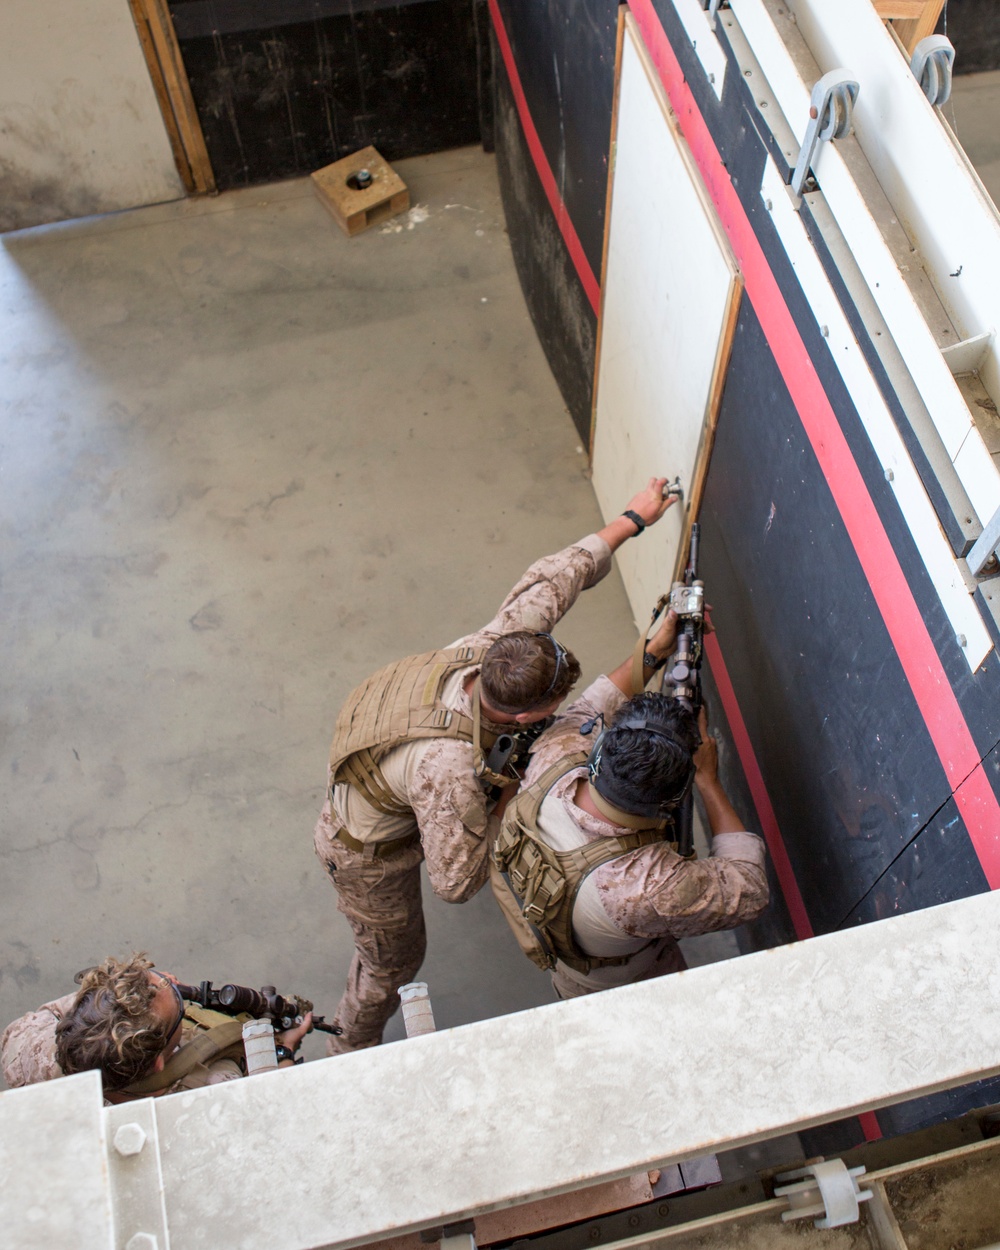 Comin’ in Hot | U.S. Reconnaissance Marines conduct CQT training